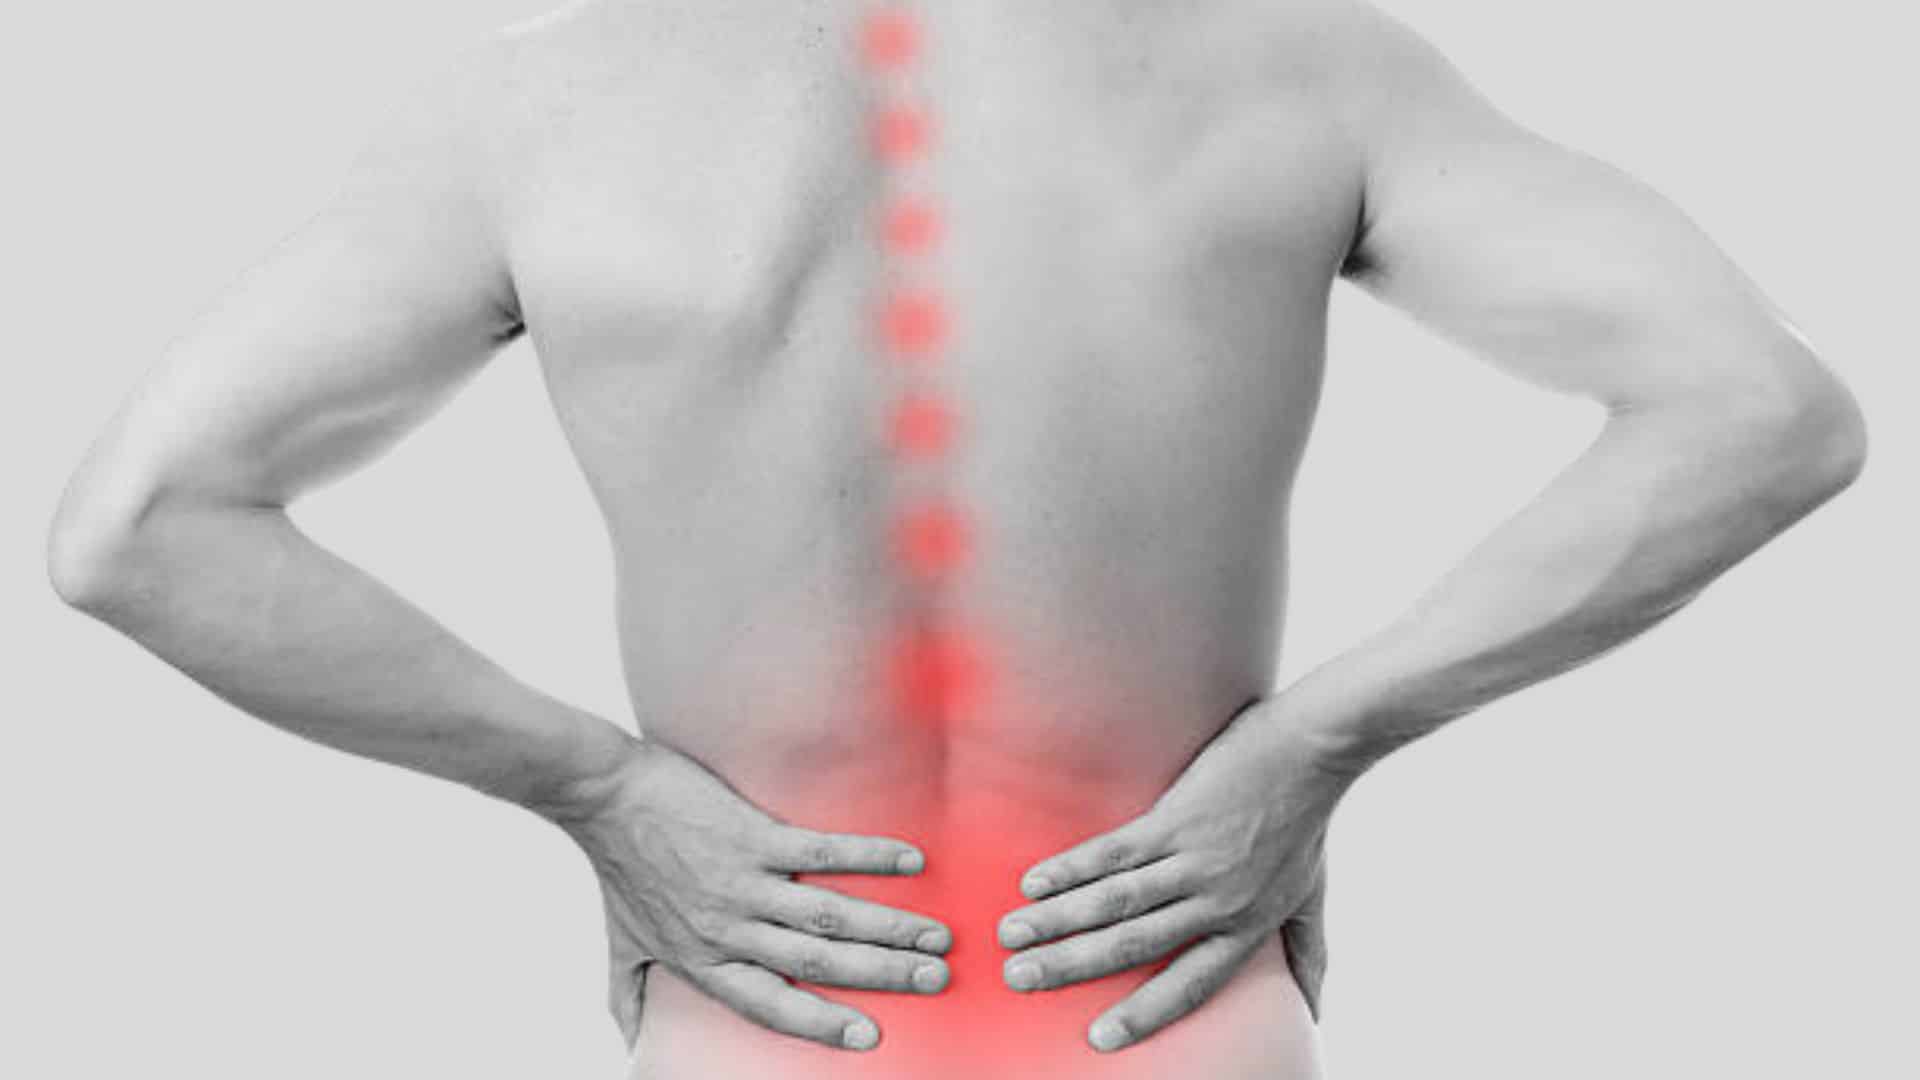 Symptoms of Thoracic Spinal Pain: What You Need to Know